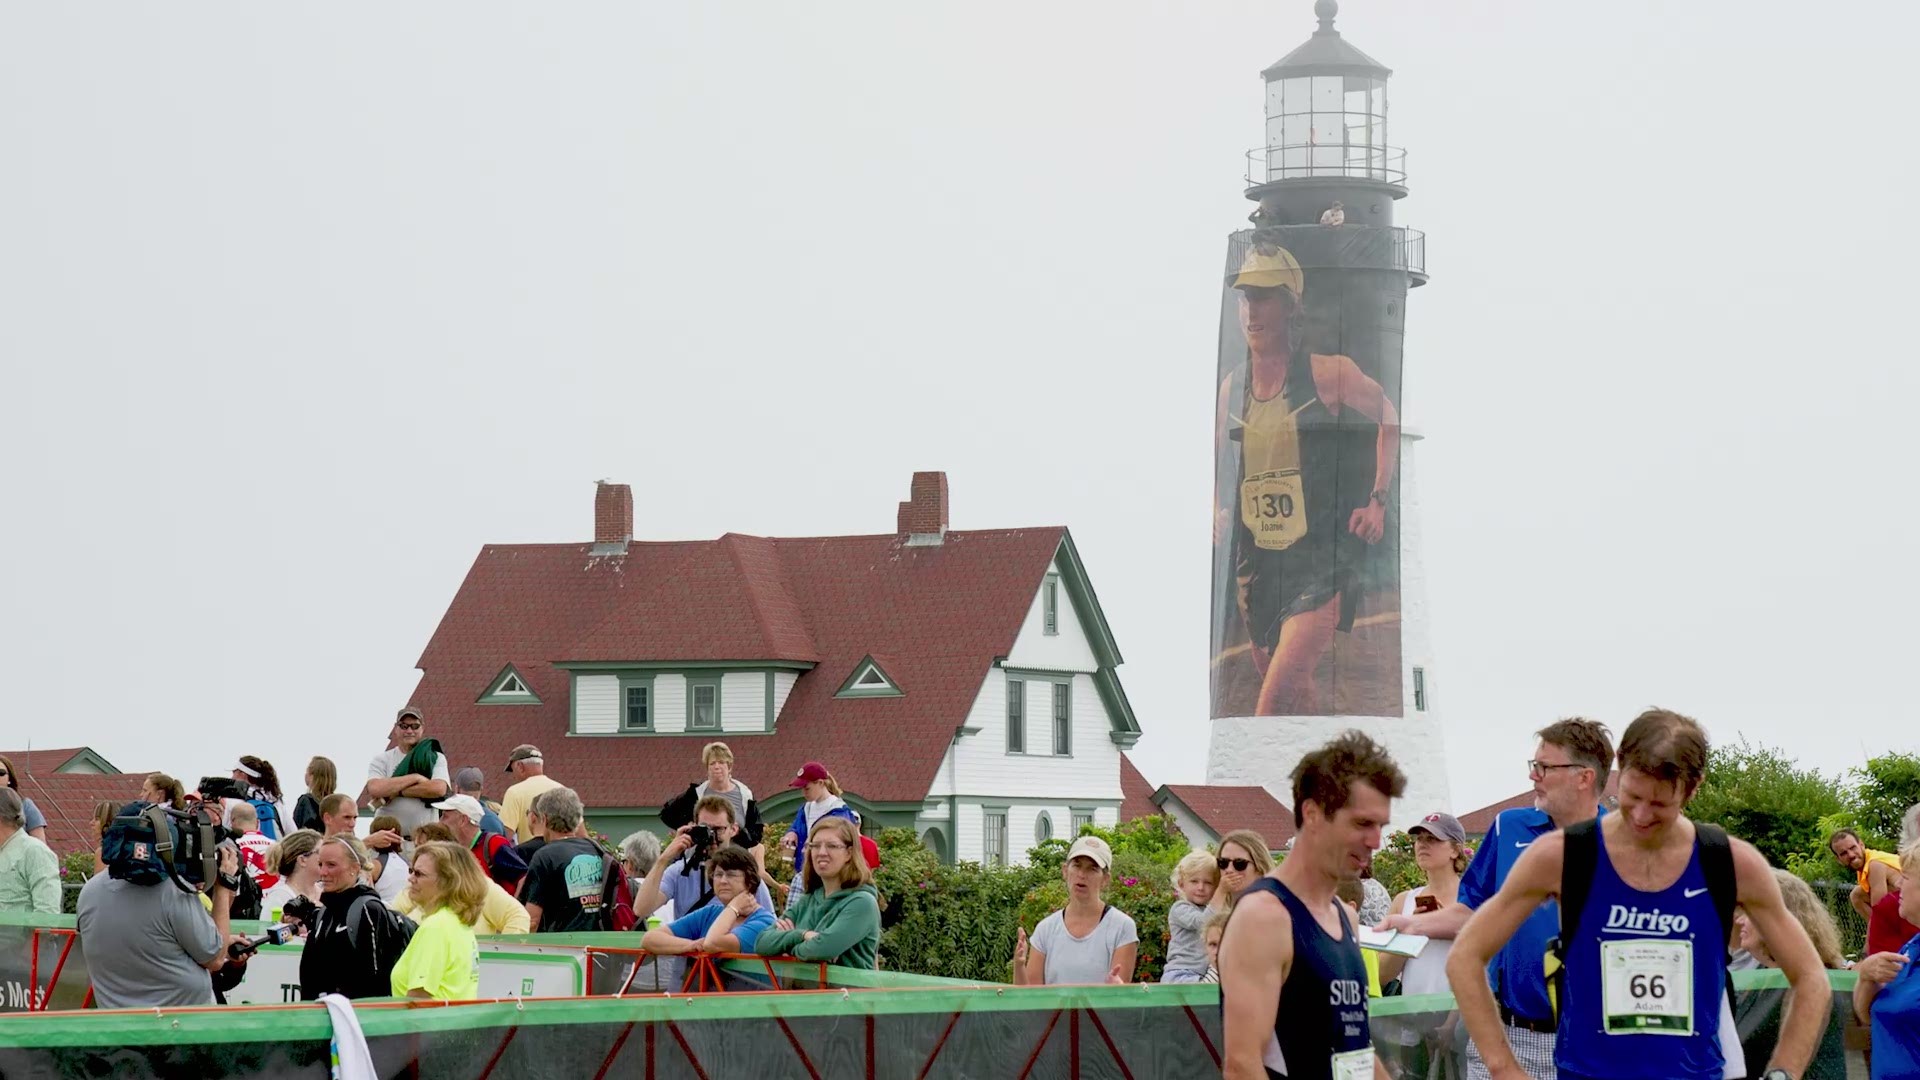 Register for the 2021 Virtual TD Beach to Beacon 10K. Registration is open until August 6, 2021.